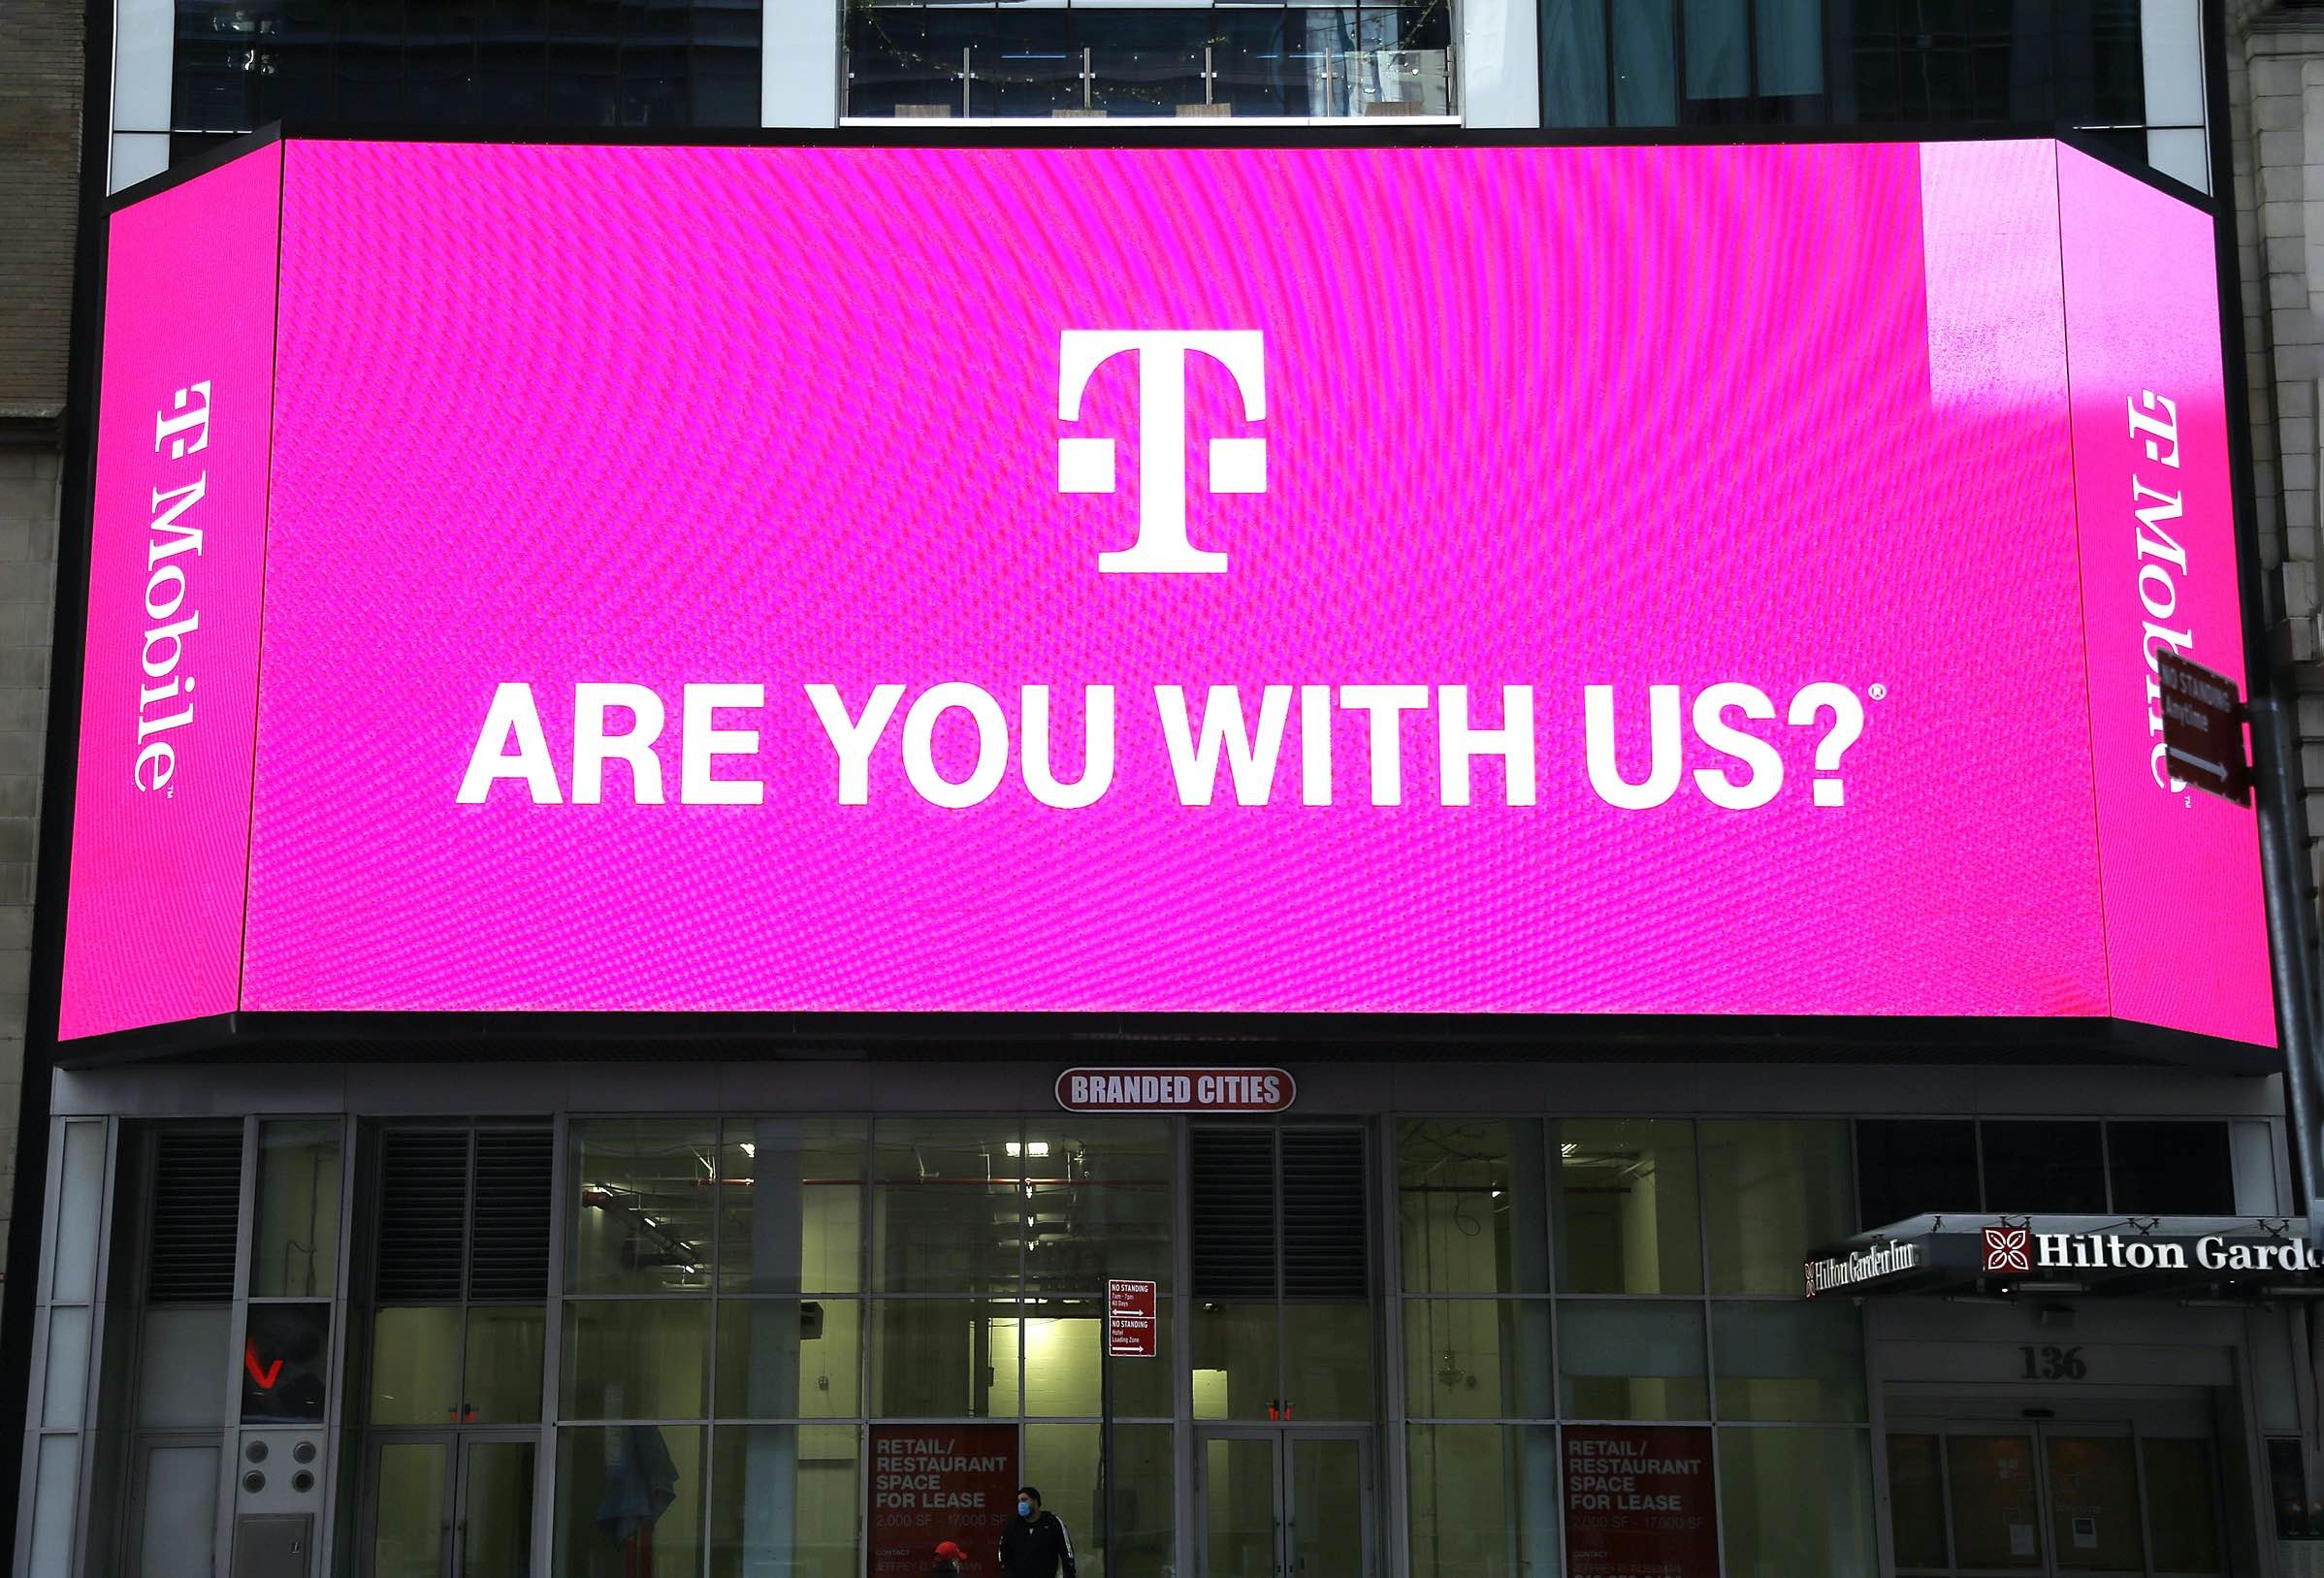 T-Mobile screwups caused nationwide outage, but FCC isn’t punishing